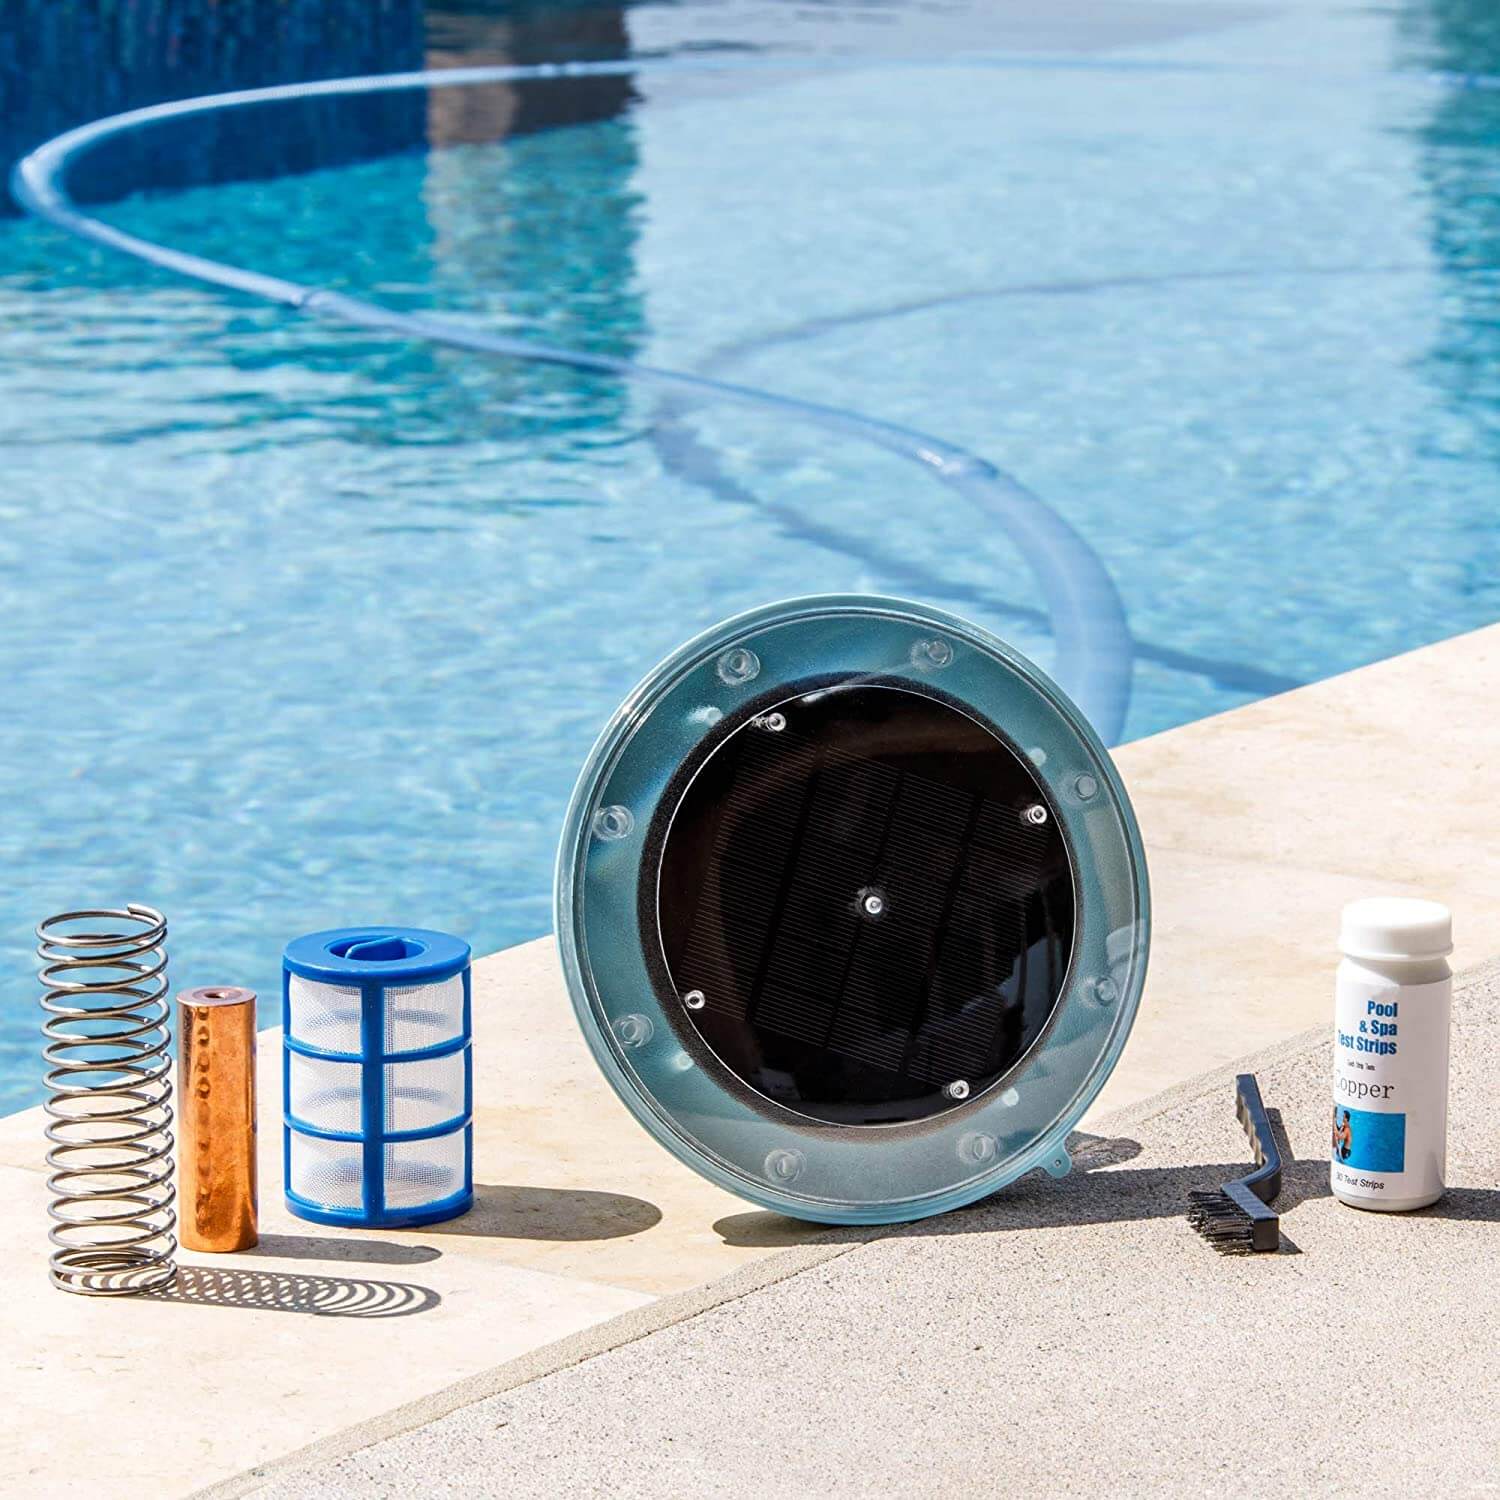 XtremepowerUS Solar Pool Ionizer Floating Water Cleaner and Purifier